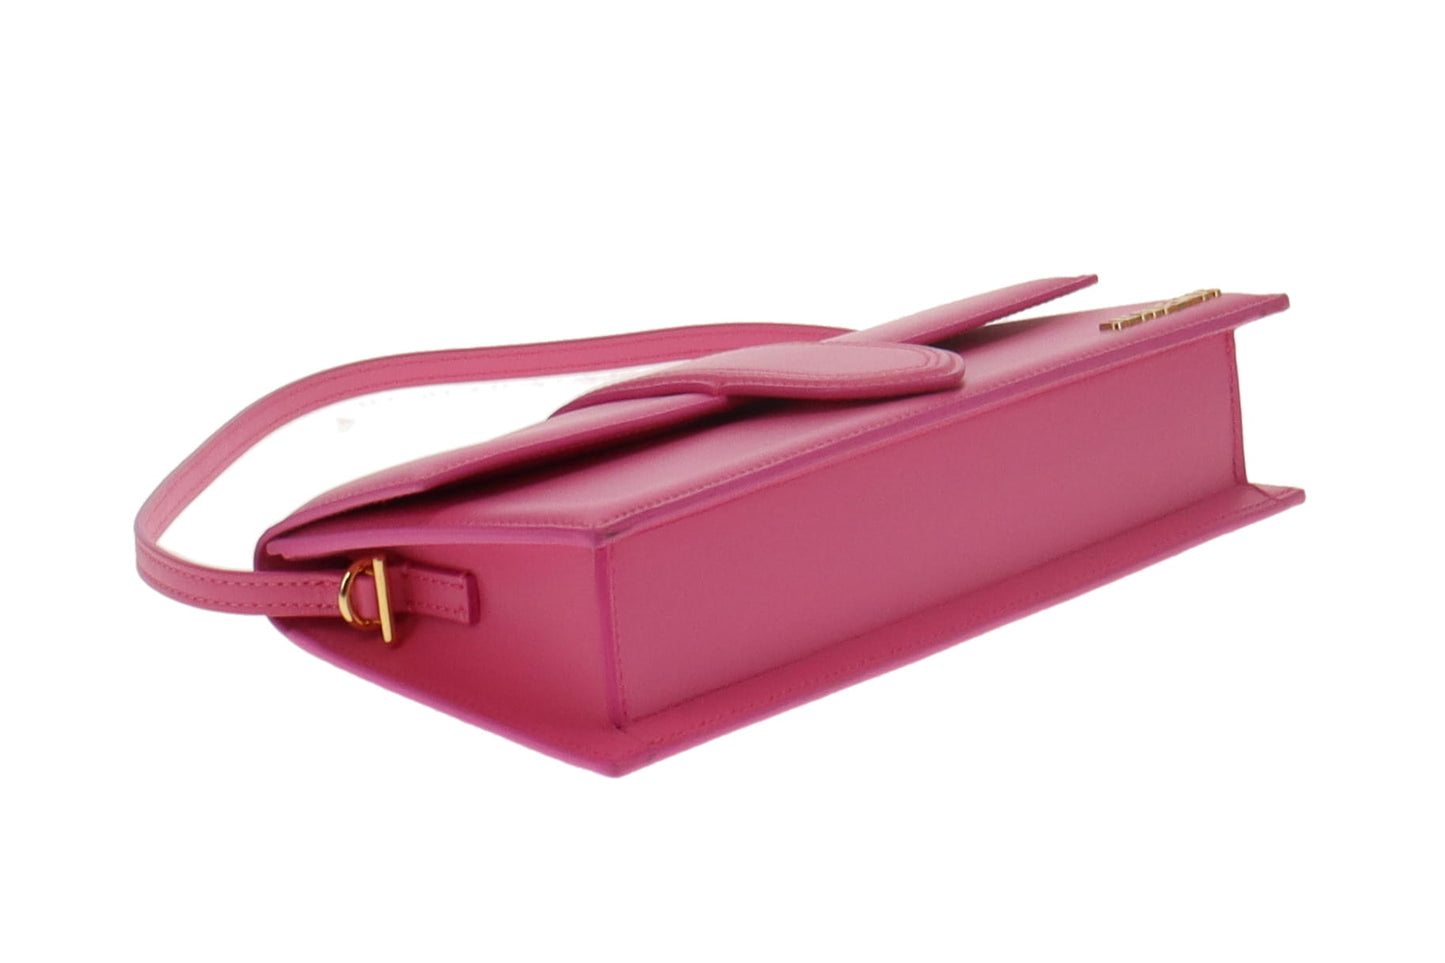 Jacquemus Pink Leather Le Bambino Long